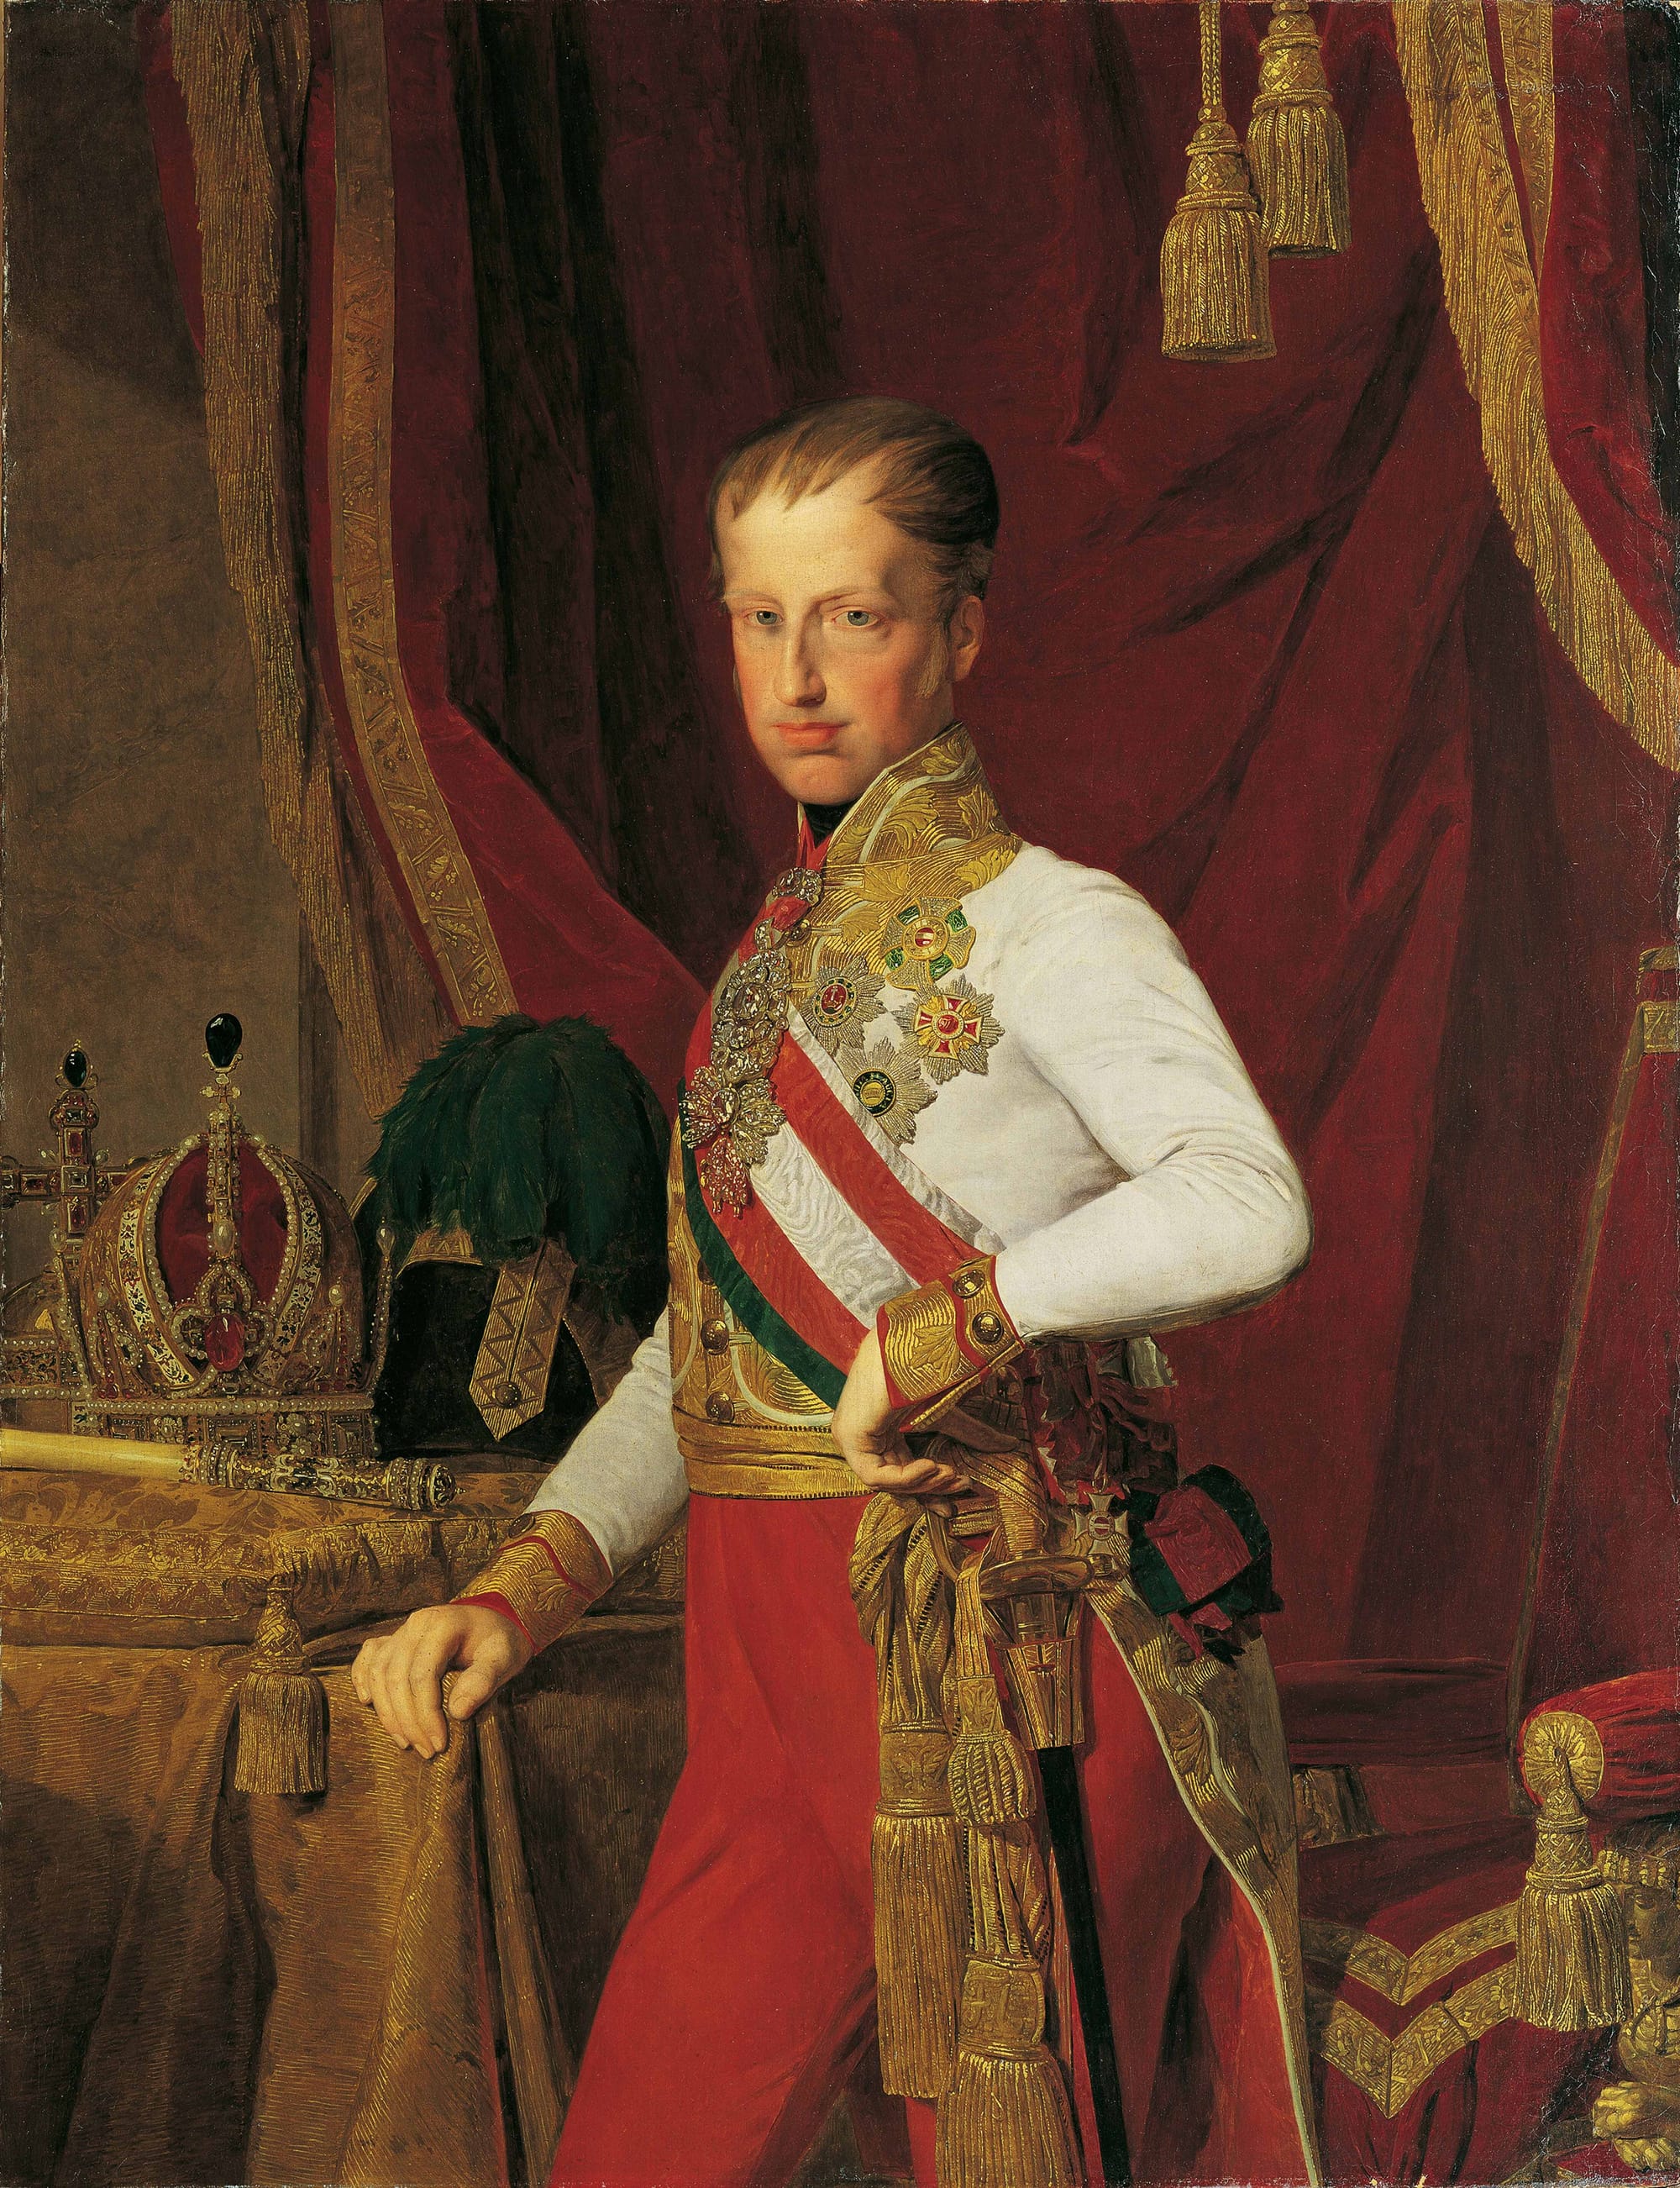 Ferdinand resplendent in red trousers, a waistcoat full of medals, and a golden sash.